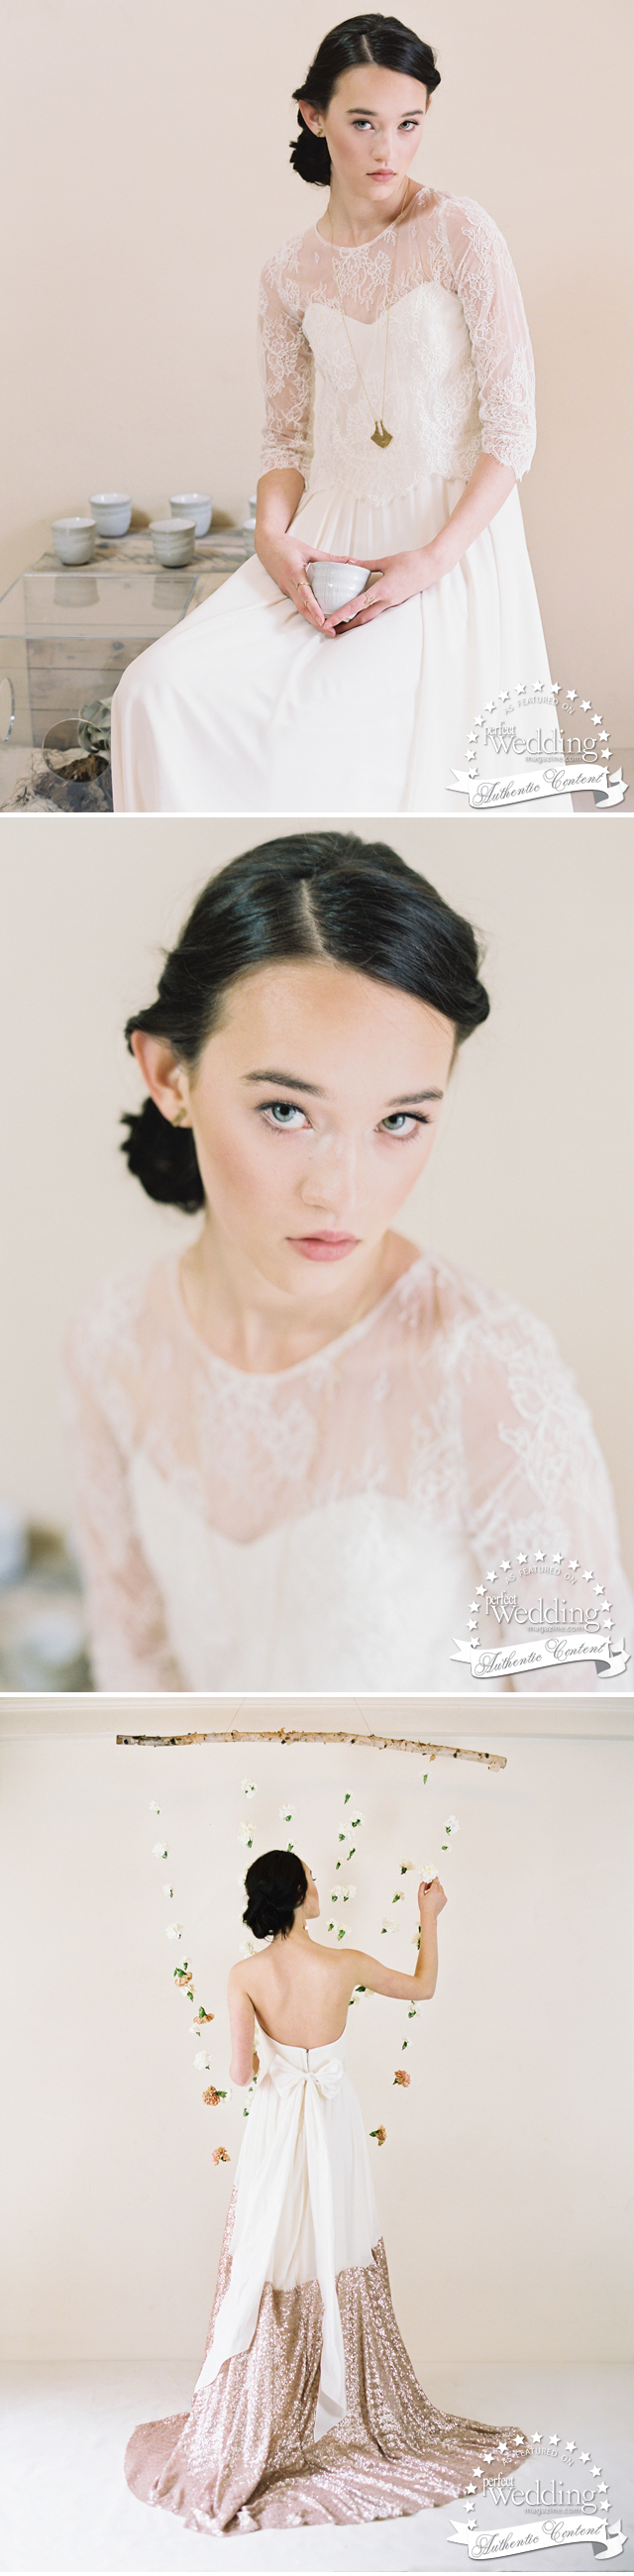 Truvelle, Truvelle Bridal, Perfect Wedding Magazine, Blush Wedding Photography , Bridal 2015 Trends